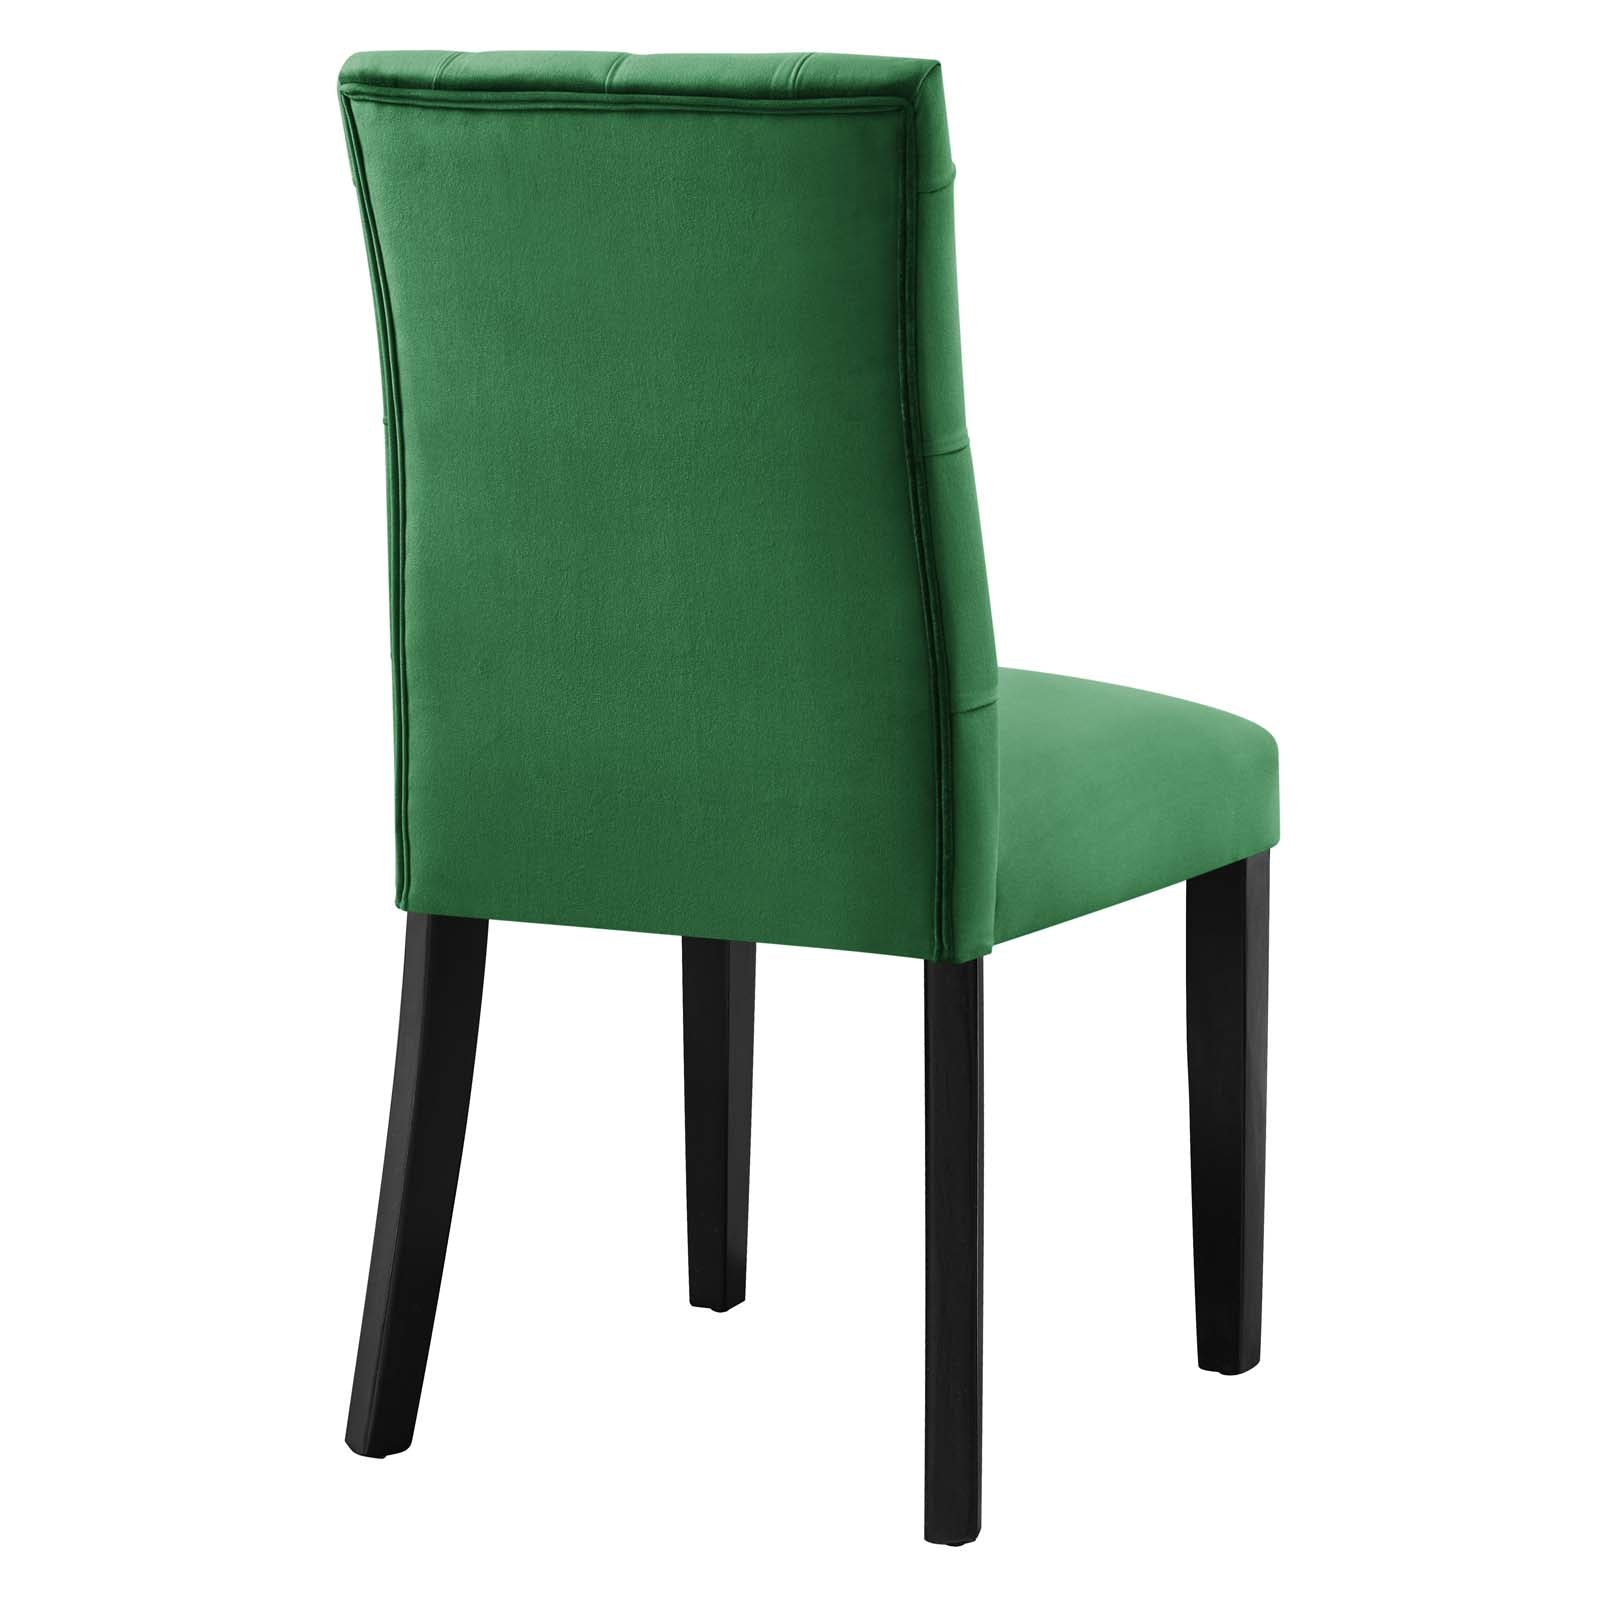 Modway Dining Chairs - Duchess Performance Velvet Dining Chairs - Set of 2 Emerald